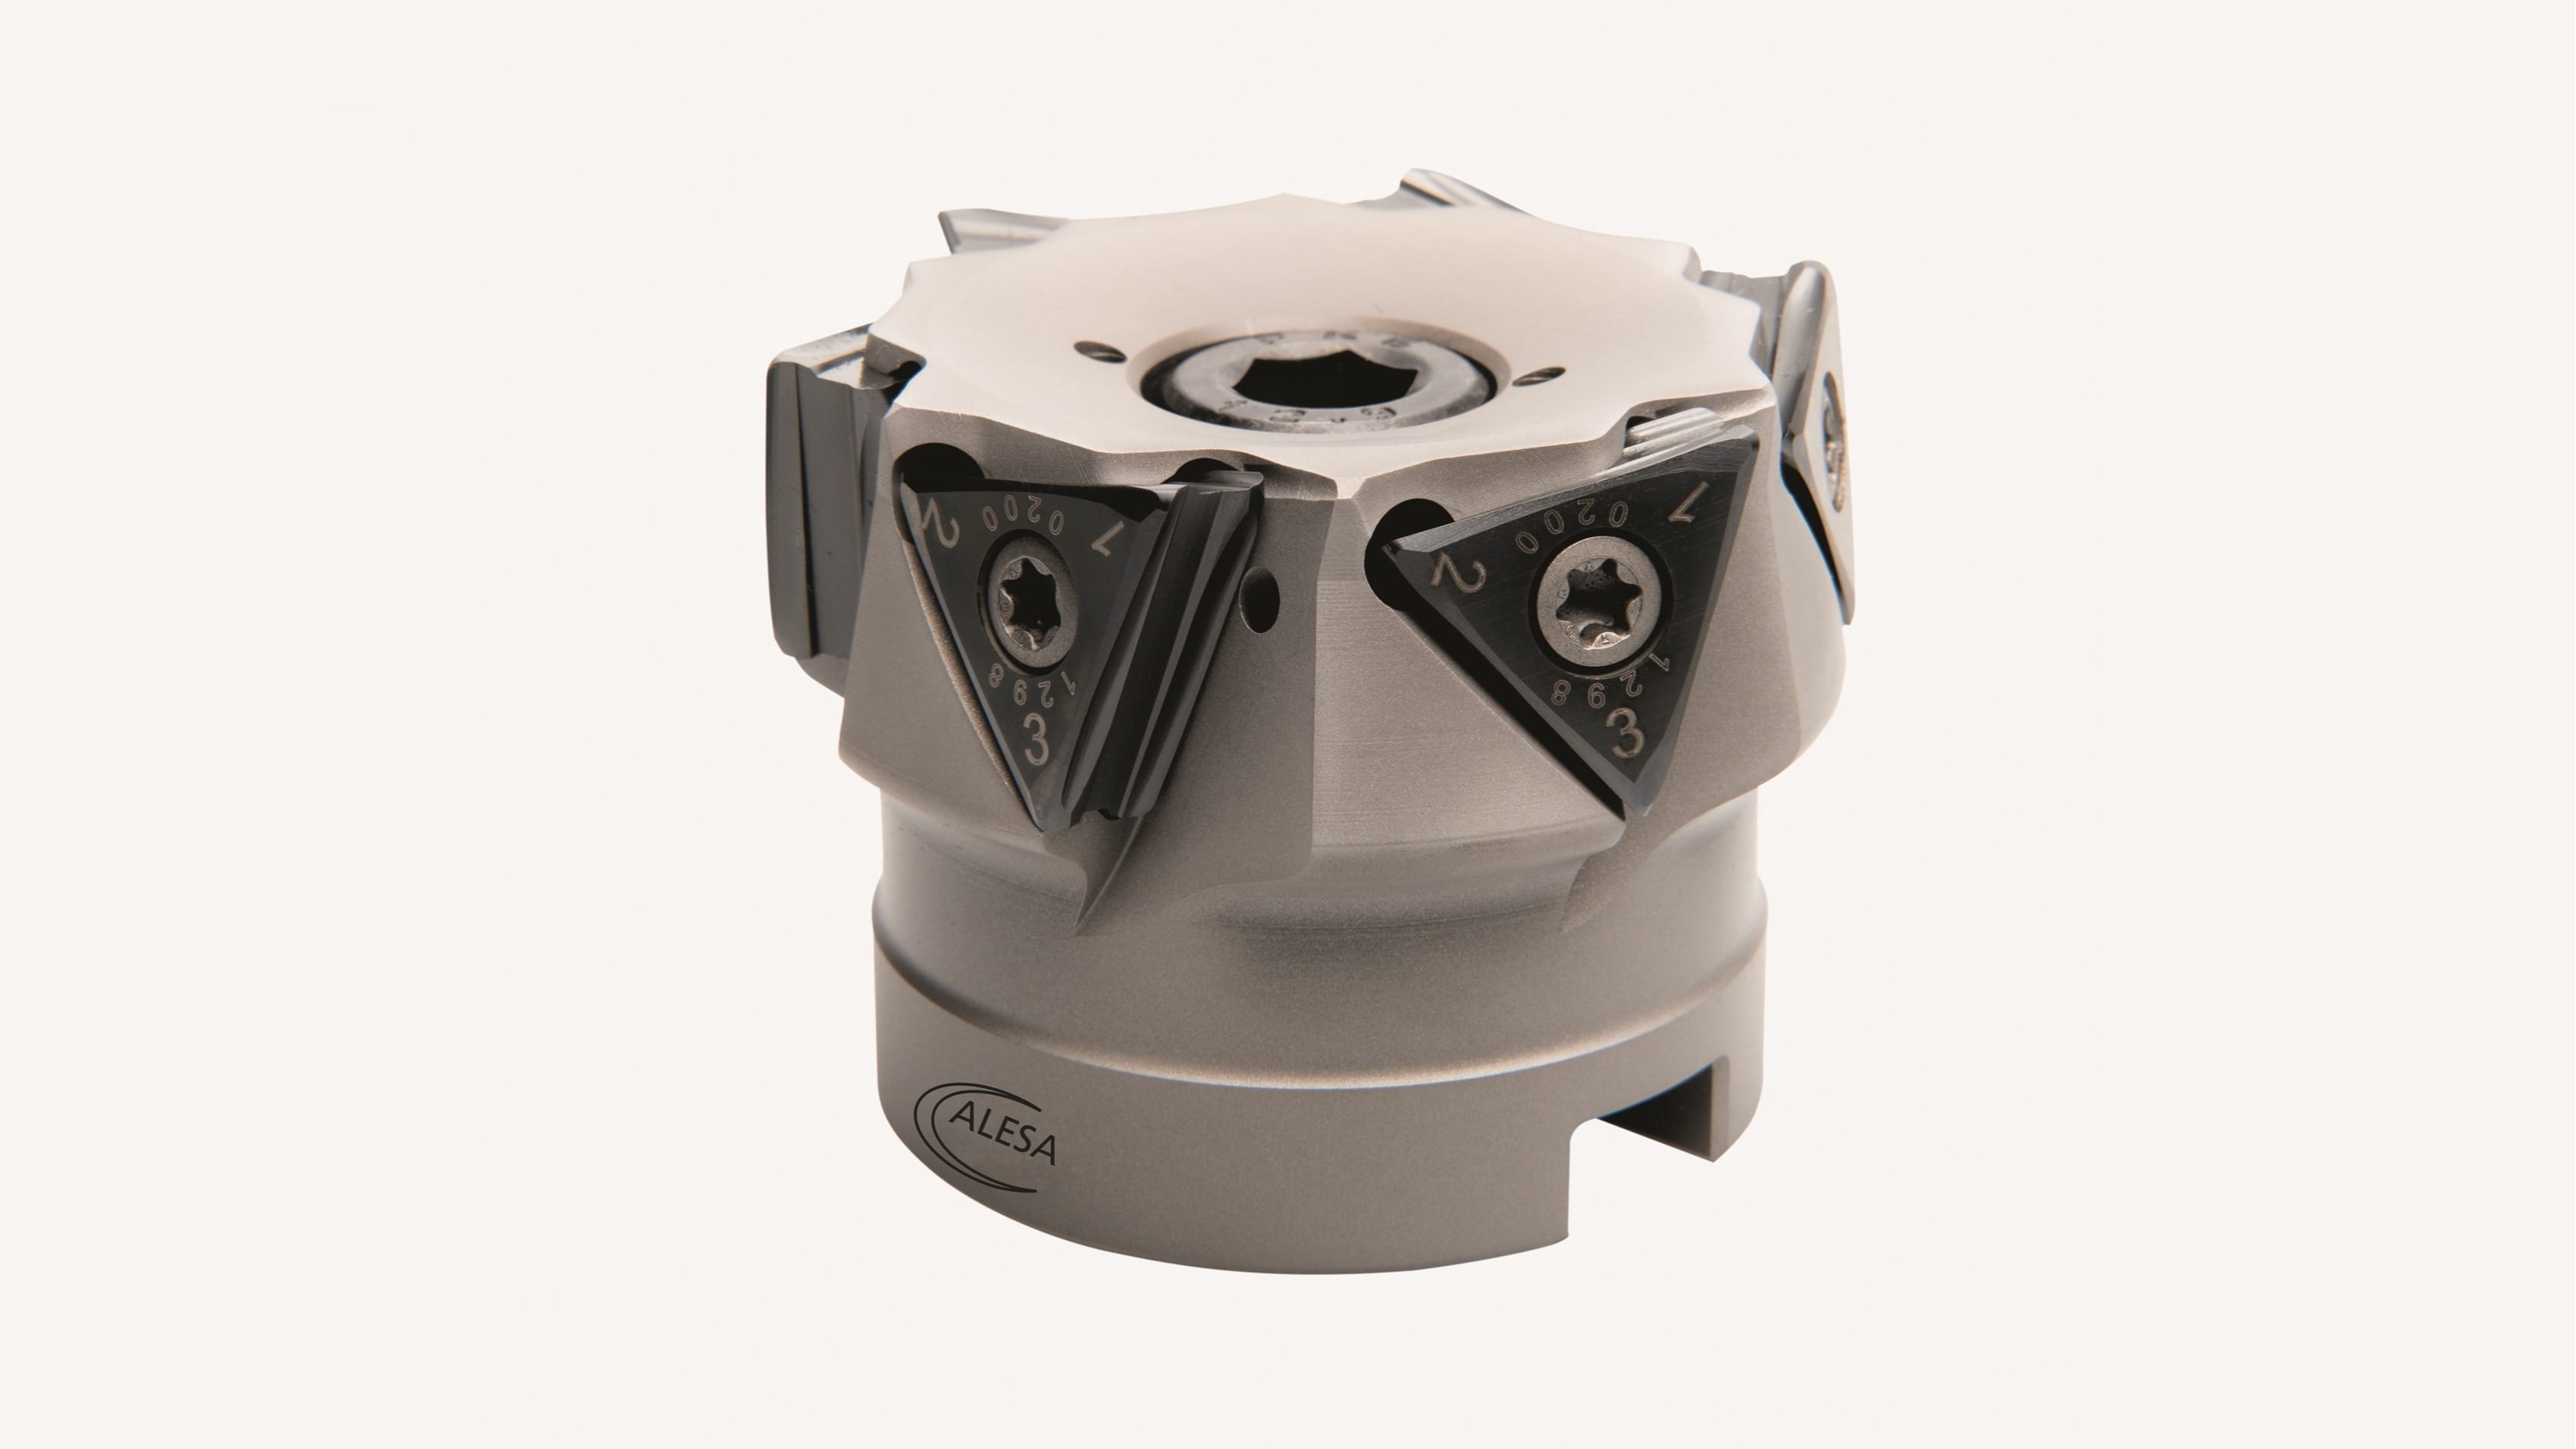 The new Delta indexable inserts, mounted on the milling cutter.